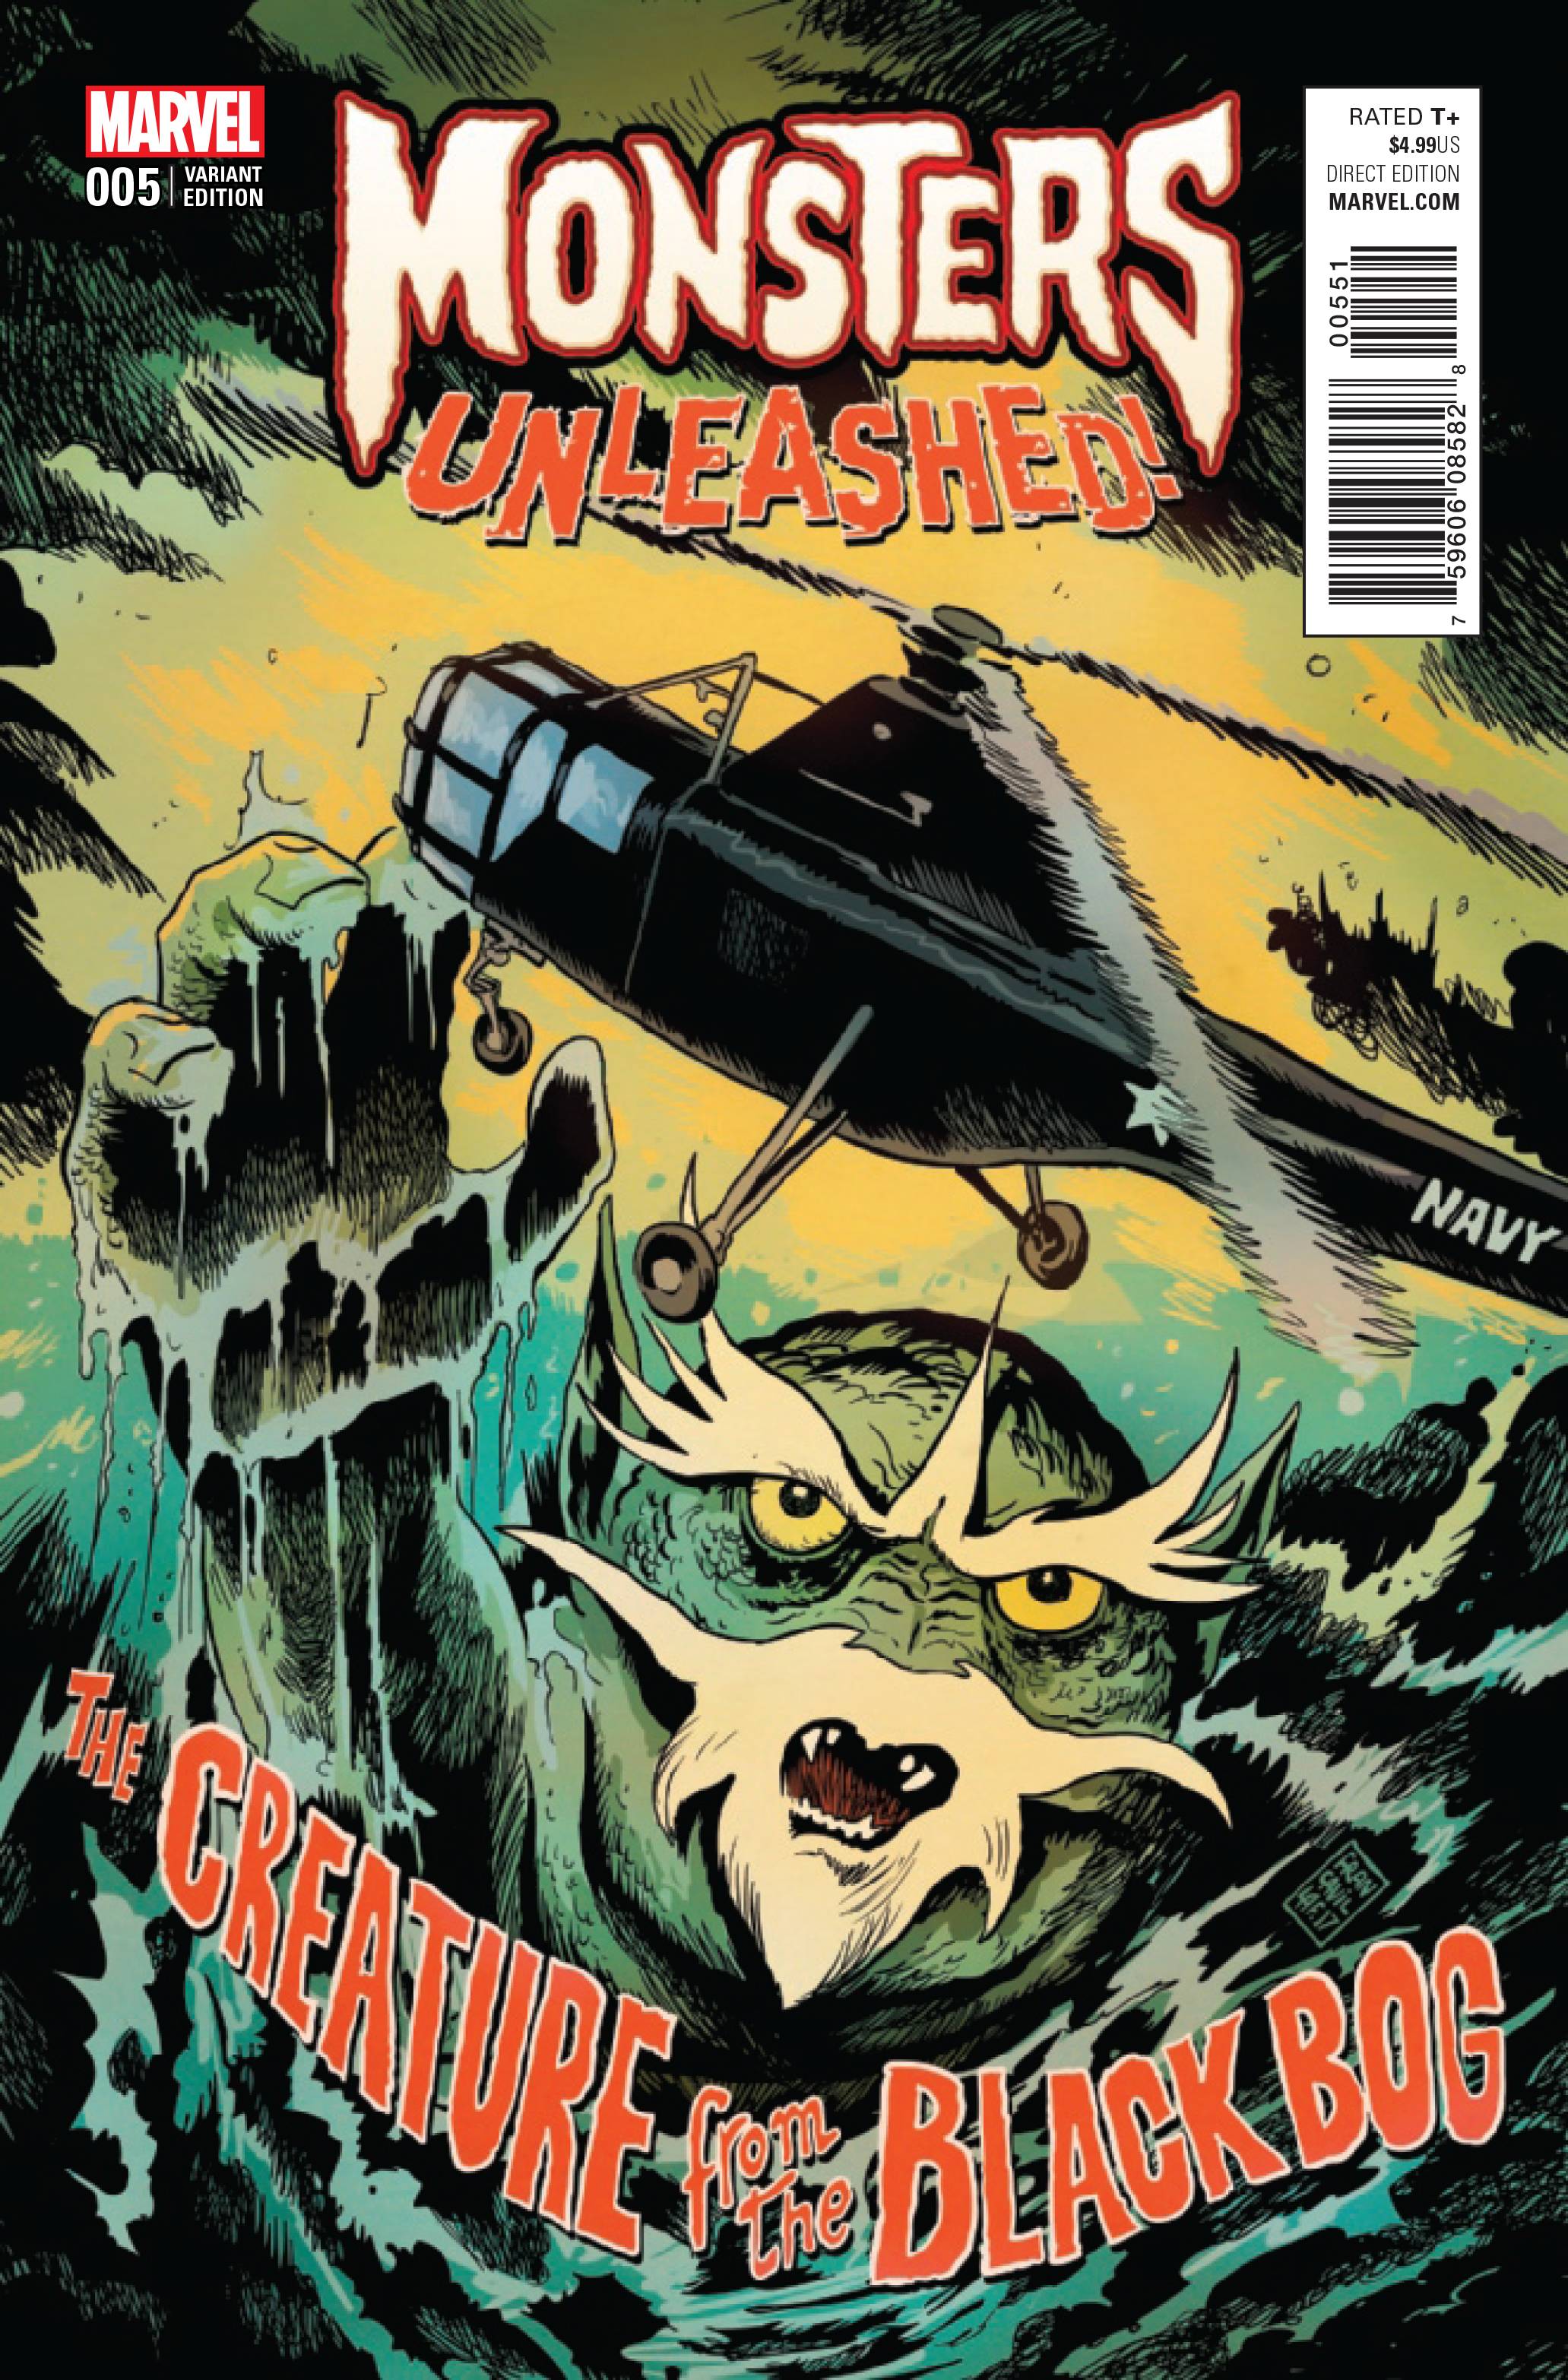 MONSTERS UNLEASHED #5